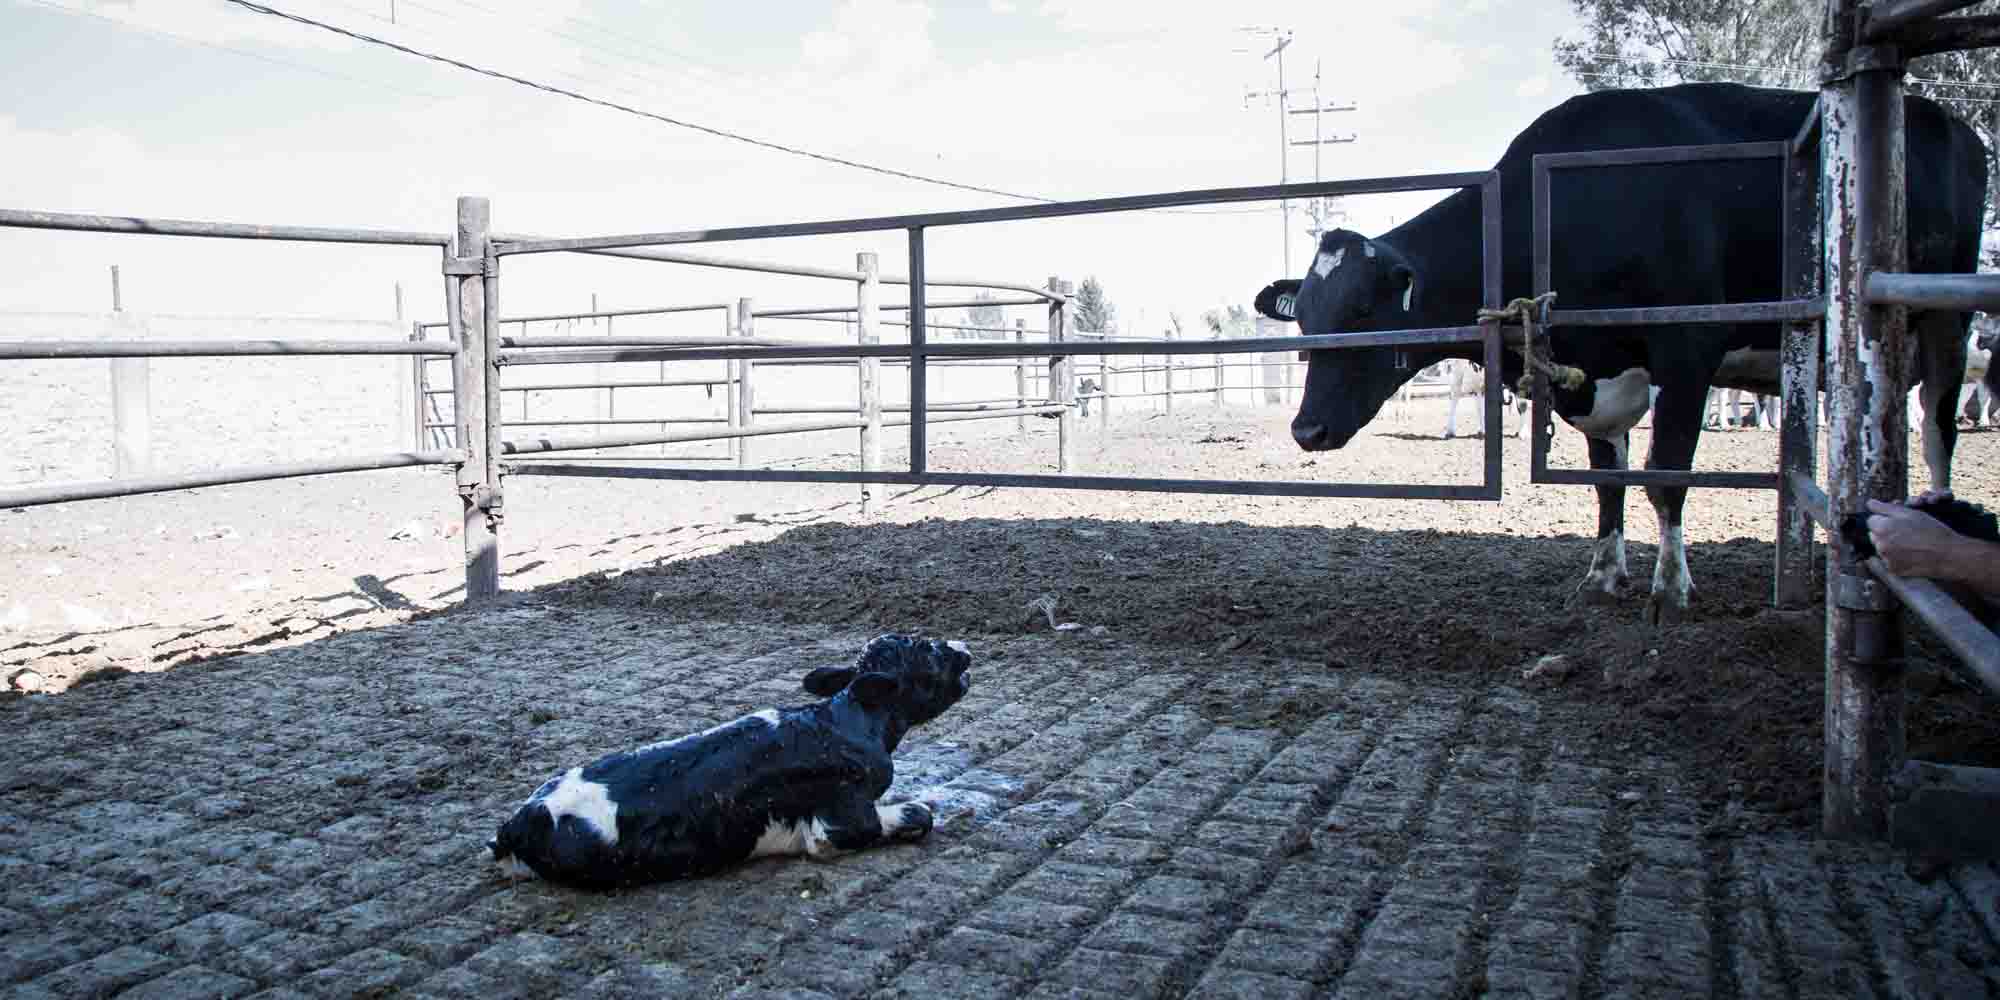 calf crying out for her mother who is separated from her by a fence